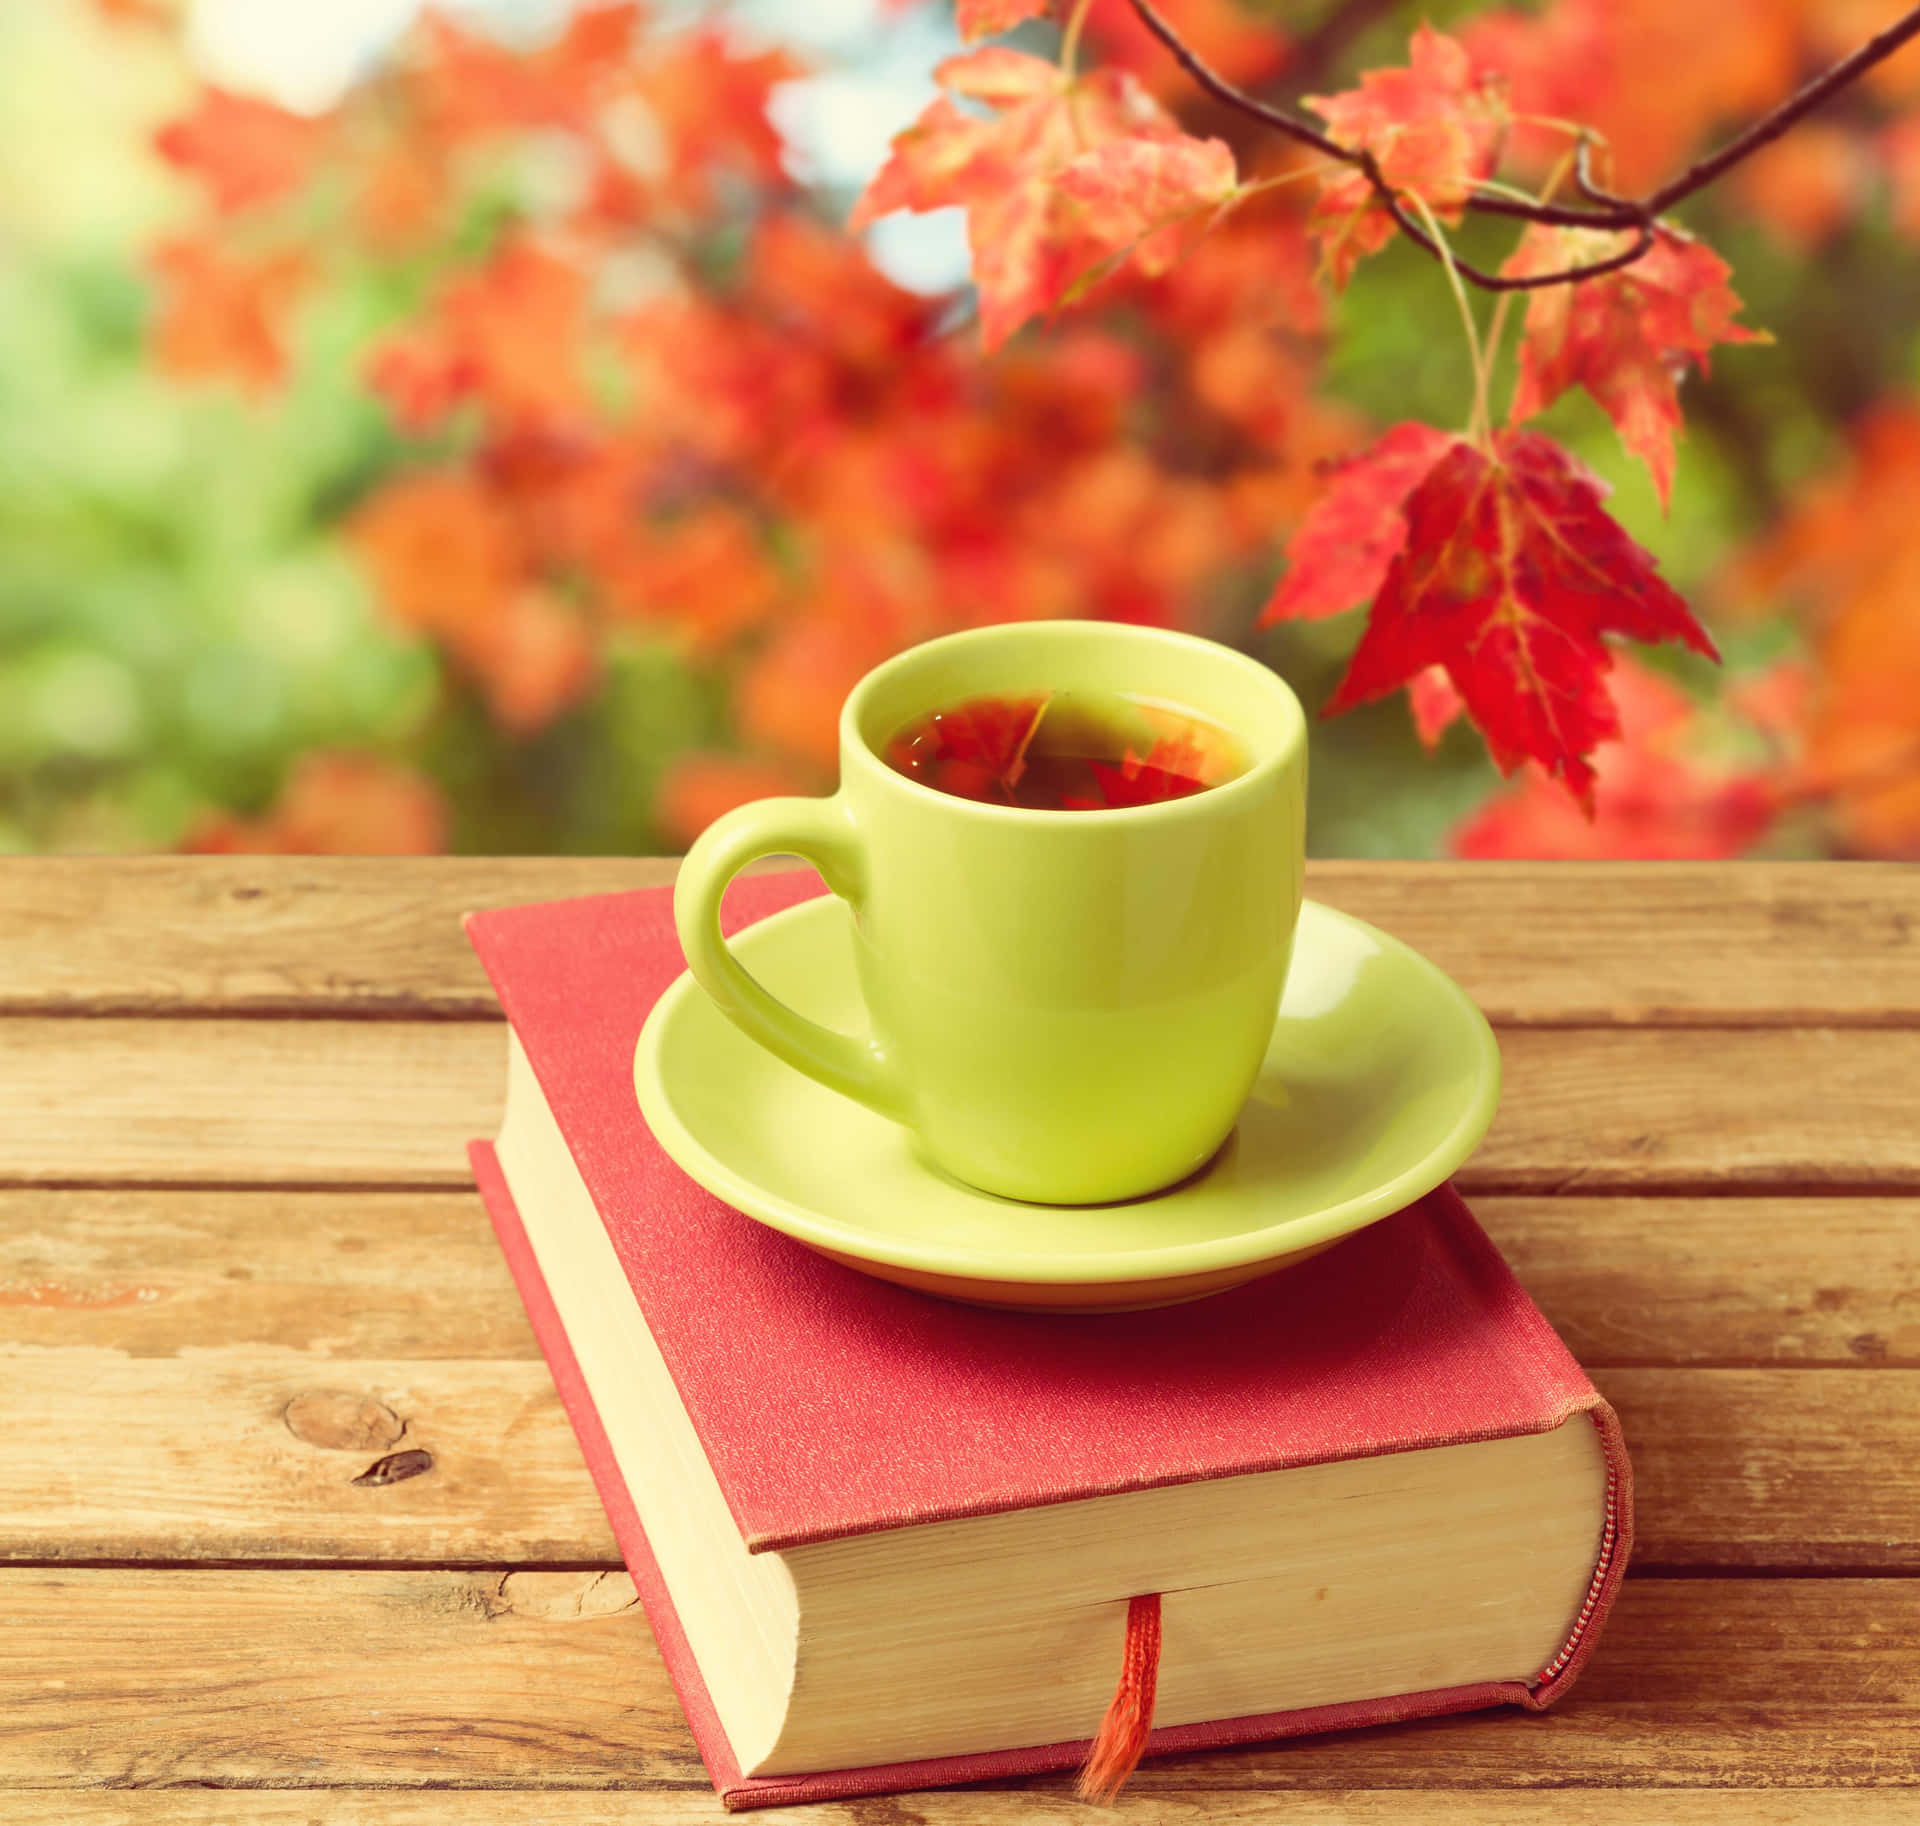 A Green Cup On A Book